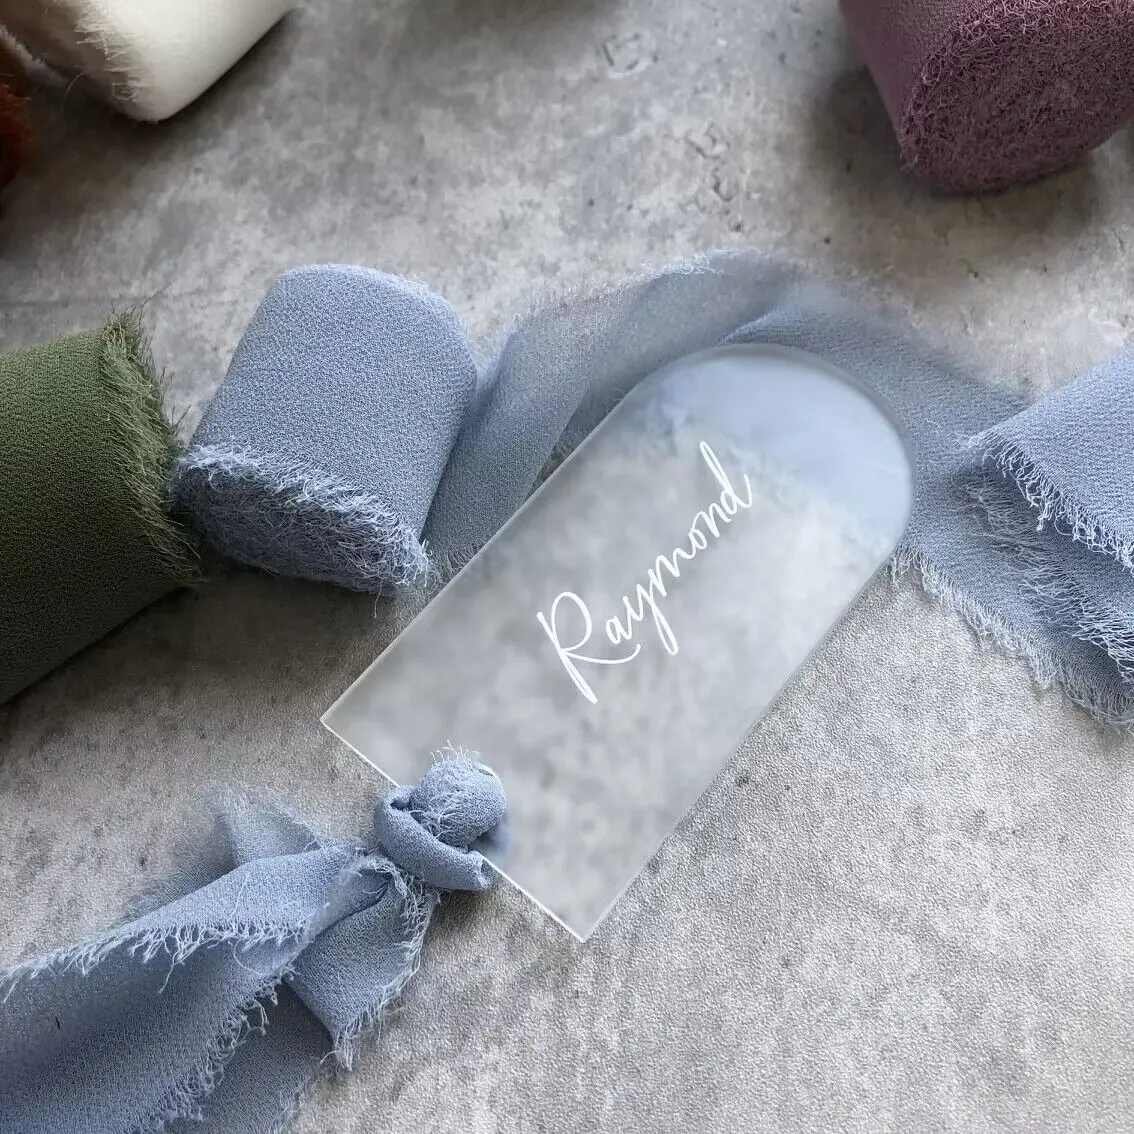 Frost NAME TAGS Custom Acrylic Name Cards with slik Ribbon Table Setting Wedding Place Cards Party Favours Hen Party Favours